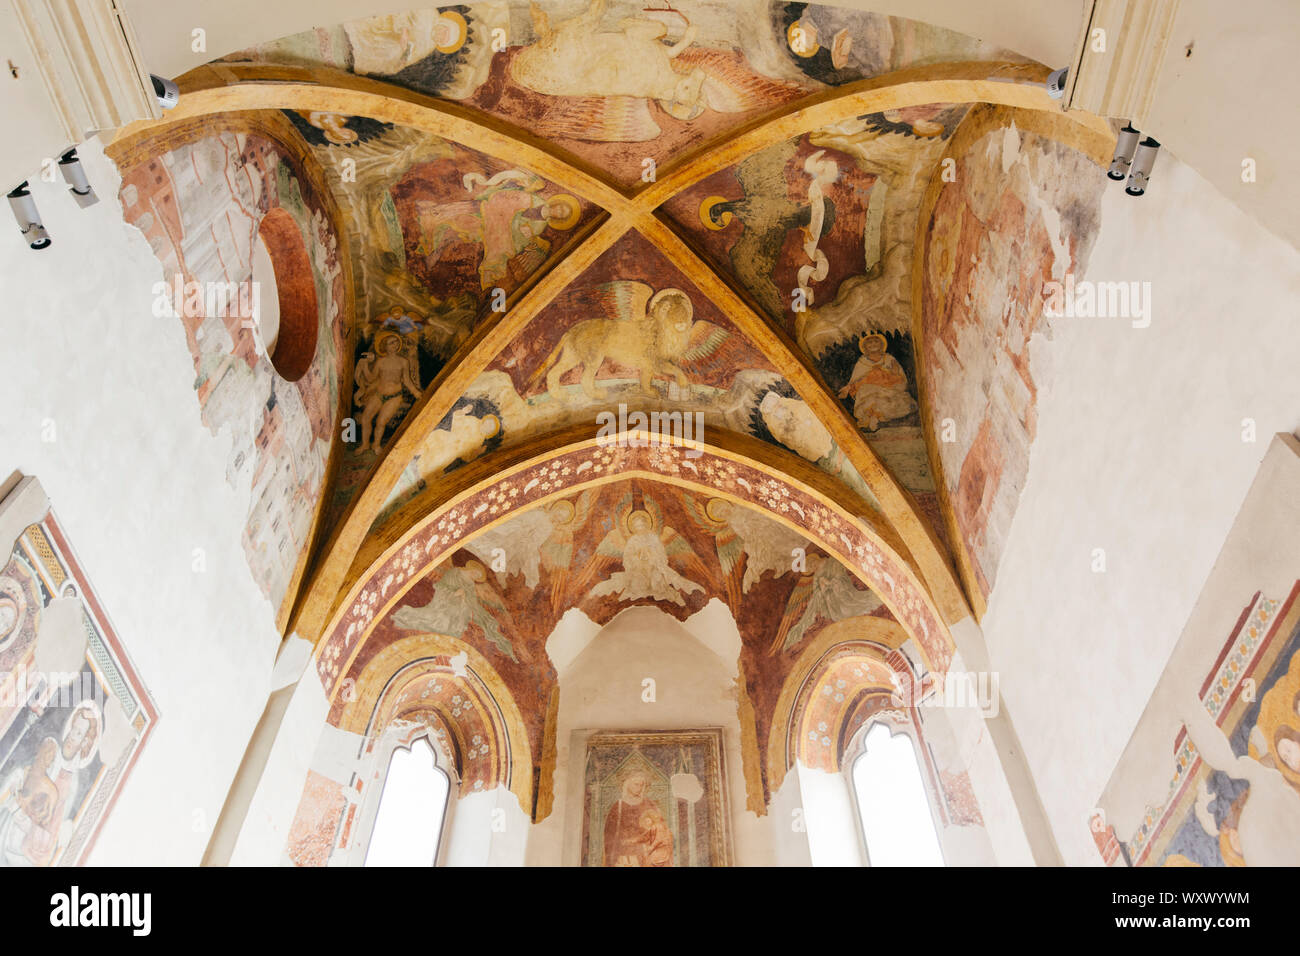 JULY 21, 2019 - PORDENONE, ITALY - The medieval Cathedral of San Marco, interior Stock Photo